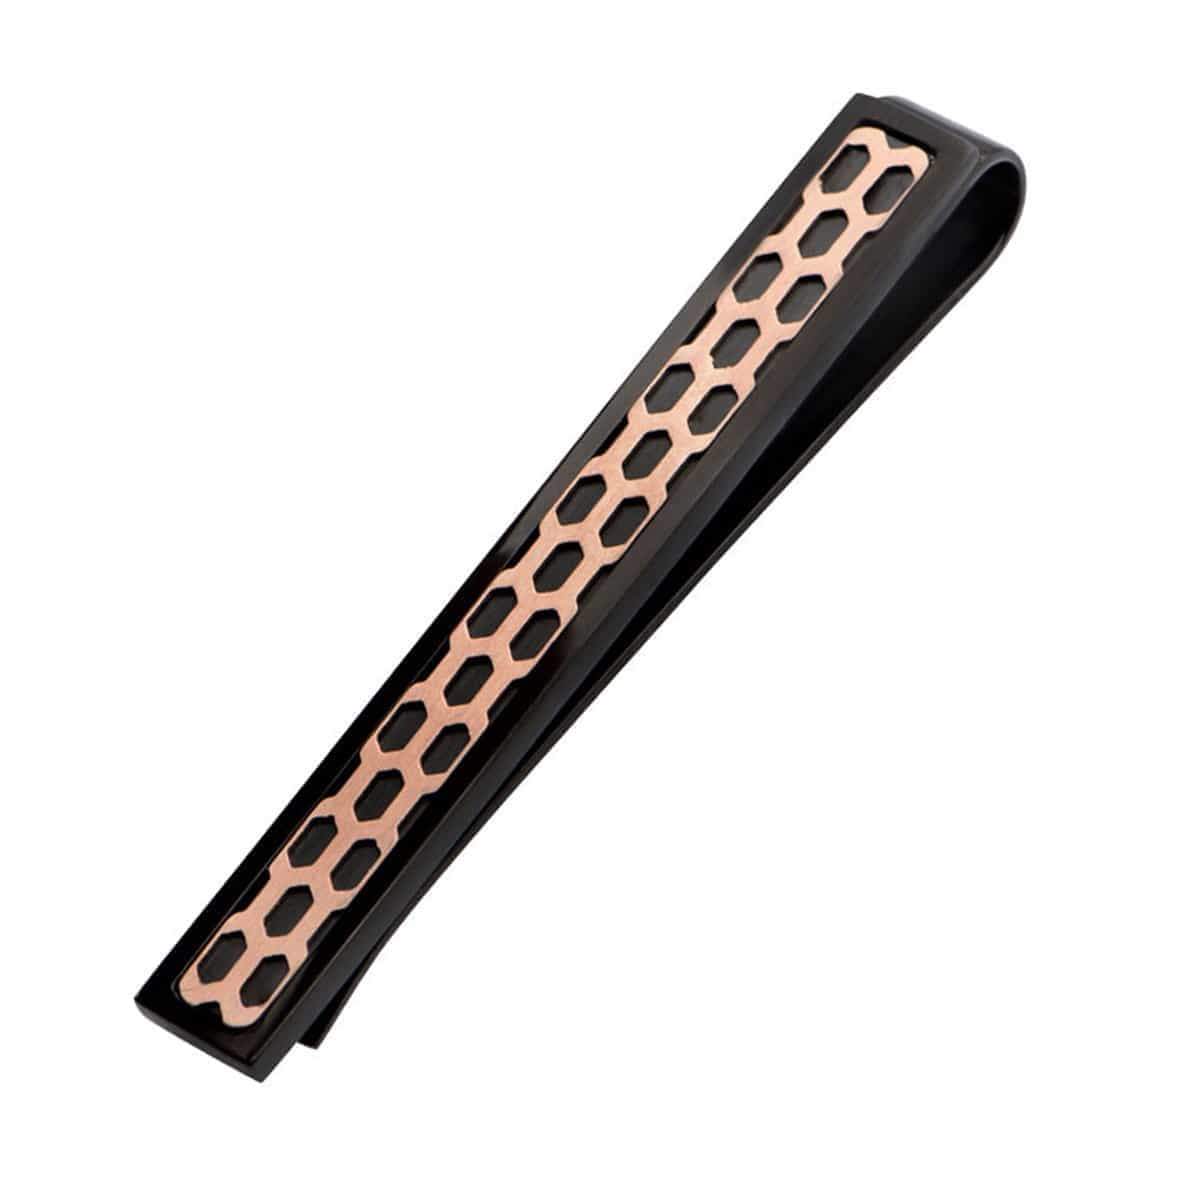 INOX JEWELRY Accessories Black & Rose Gold Stainless Steel Car Grille Tie Bar SSTC14442